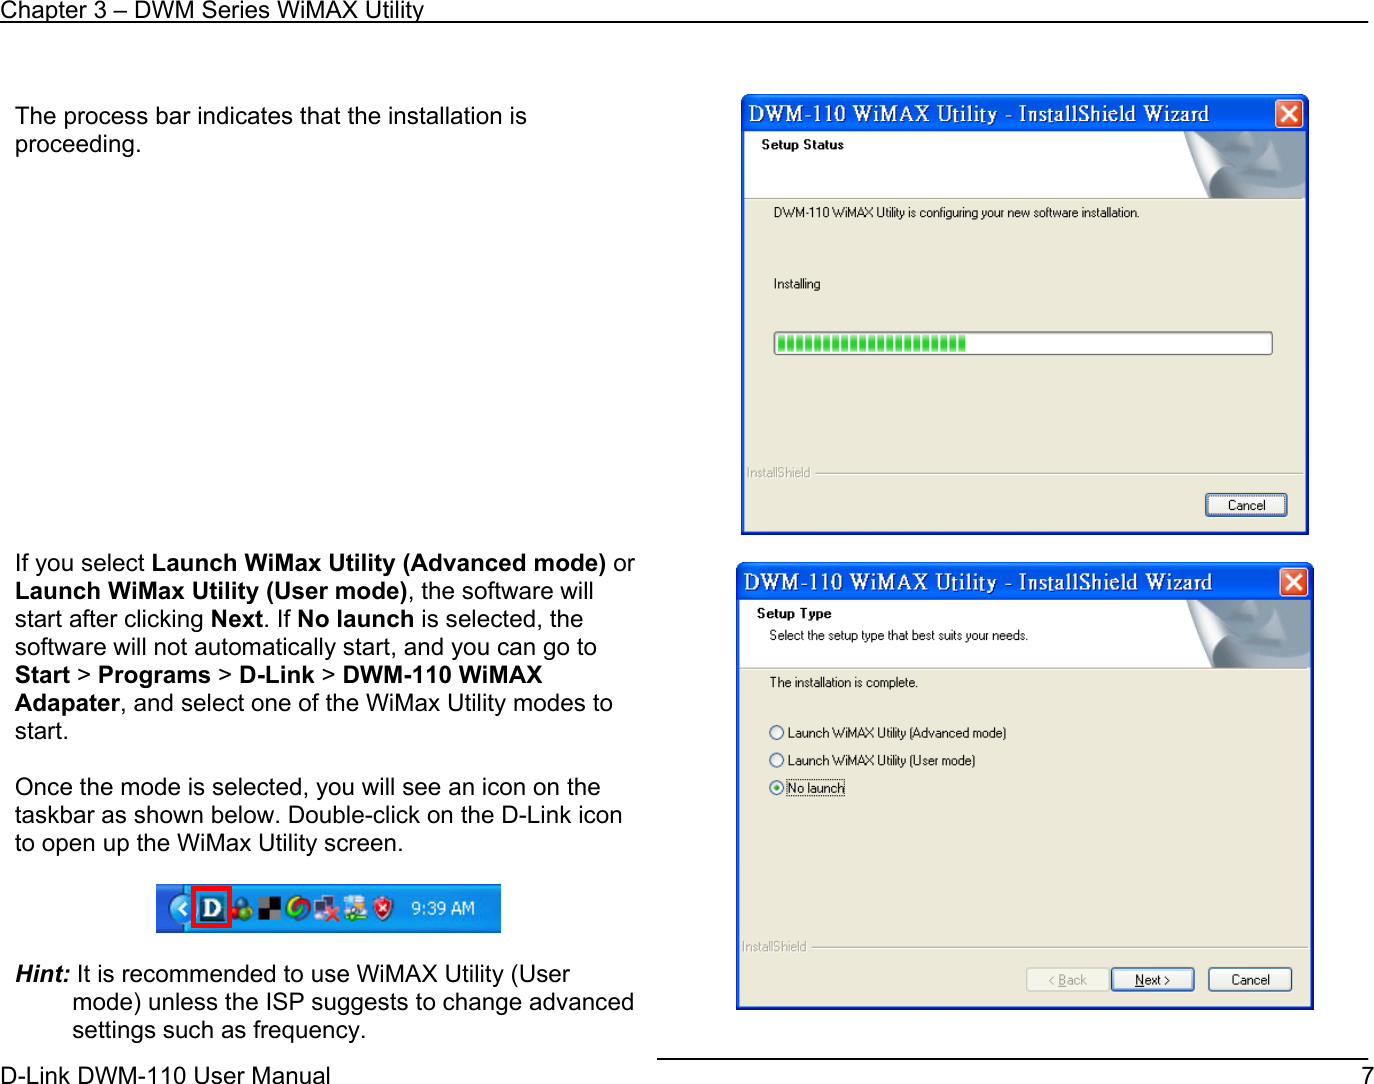 Chapter 3 – DWM Series WiMAX Utility D-Link DWM-110 User Manual   7     The process bar indicates that the installation is proceeding.               If you select Launch WiMax Utility (Advanced mode) or Launch WiMax Utility (User mode), the software will start after clicking Next. If No launch is selected, the software will not automatically start, and you can go to Start &gt; Programs &gt; D-Link &gt; DWM-110 WiMAX Adapater, and select one of the WiMax Utility modes to start.  Once the mode is selected, you will see an icon on the taskbar as shown below. Double-click on the D-Link icon to open up the WiMax Utility screen.    Hint: It is recommended to use WiMAX Utility (User mode) unless the ISP suggests to change advanced settings such as frequency. 